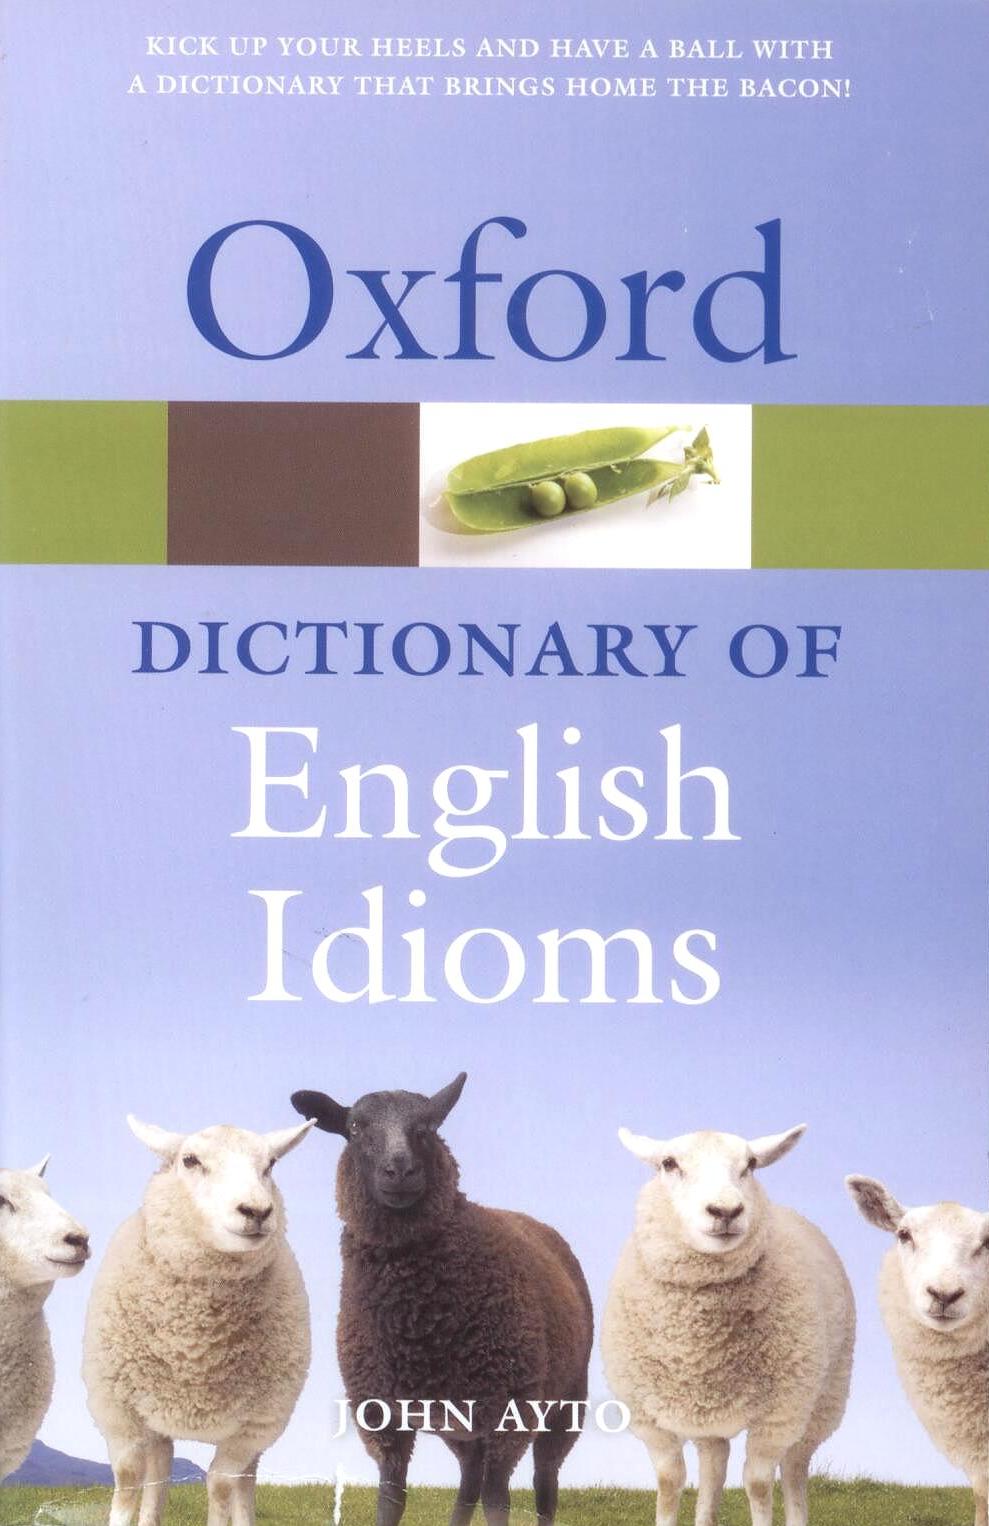 Oxford Dictionary of English Idioms (3rd Edition)